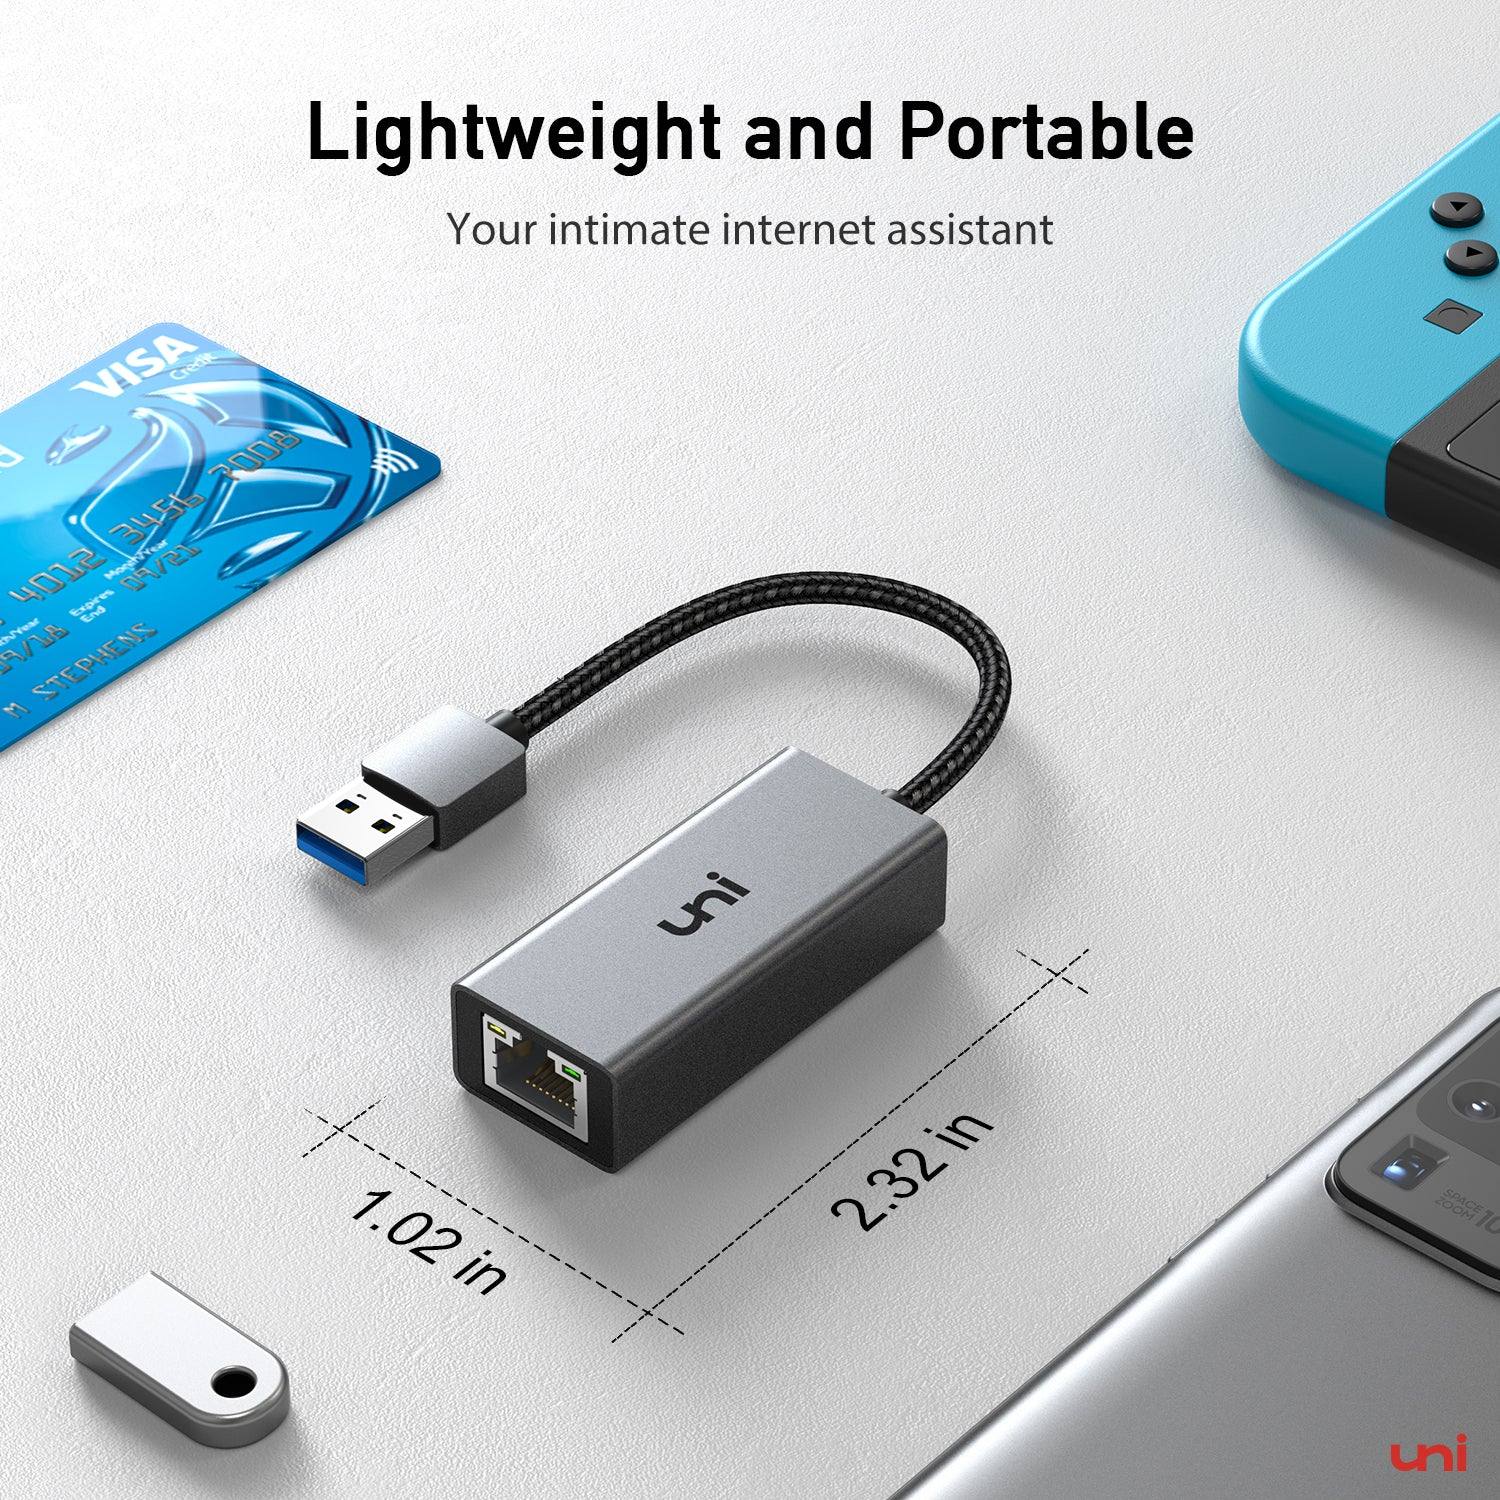 Wired Internet LAN Adapter for Switch - Hardware - Nintendo - Nintendo  Official Site